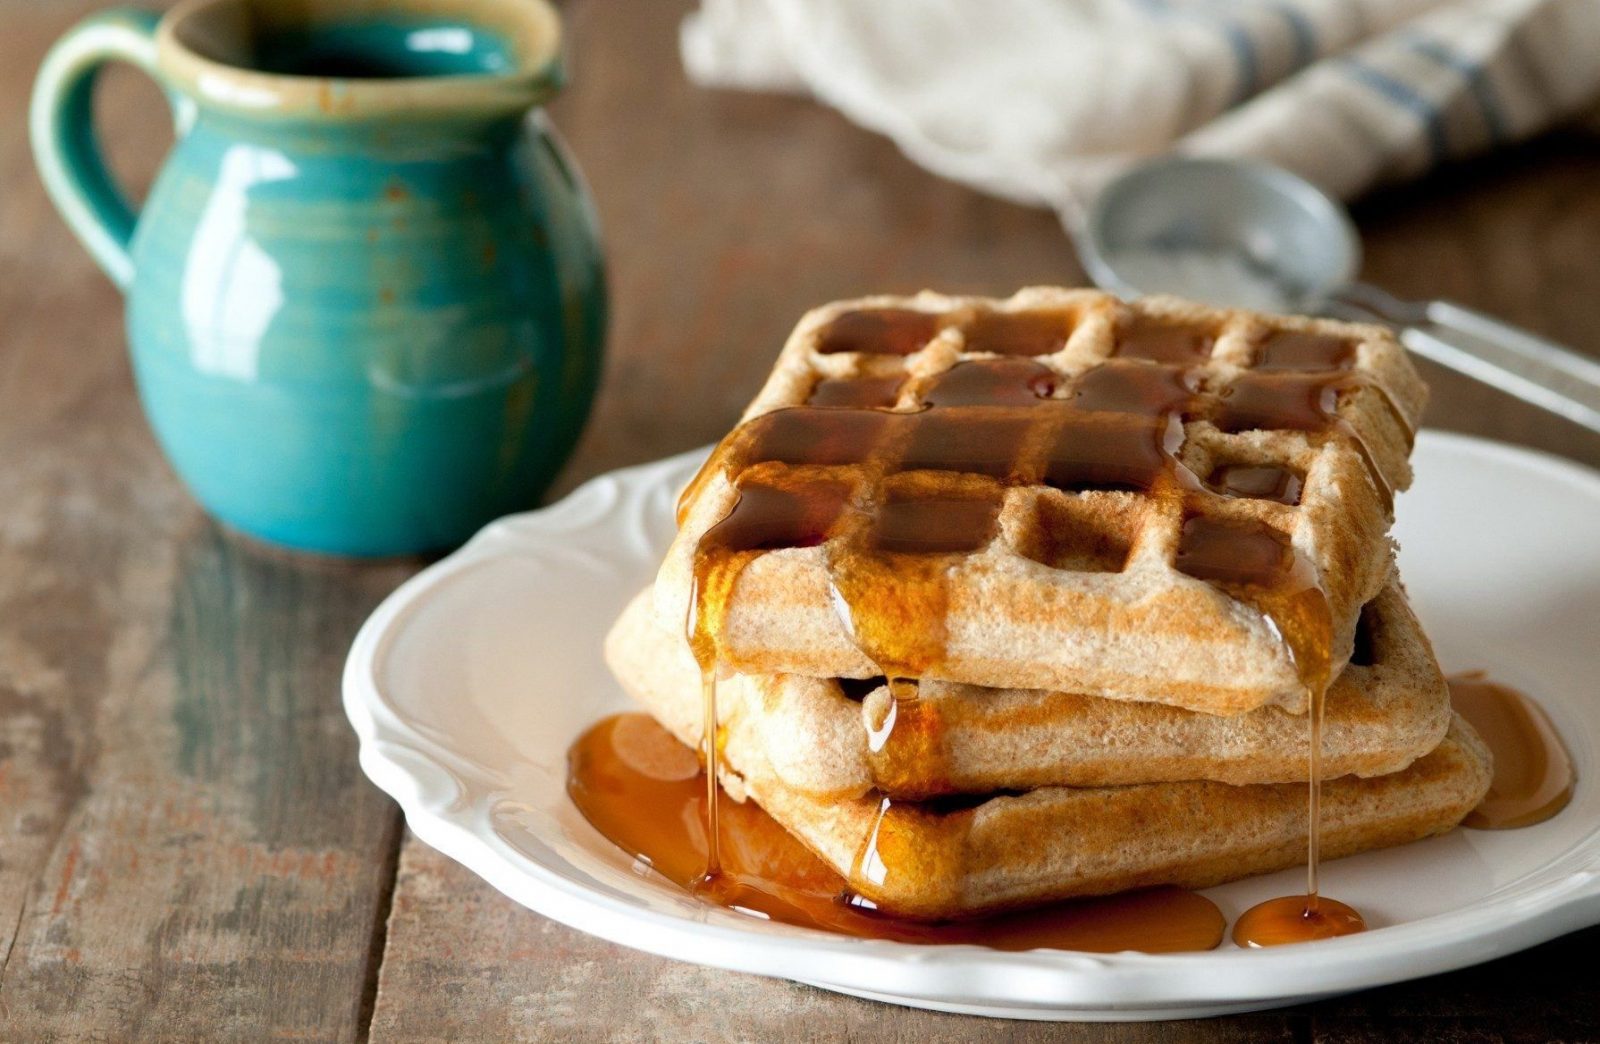 Eat Food for Each Letter & We'll Reveal Your Mental Age Quiz Waffles With Maple Syrup